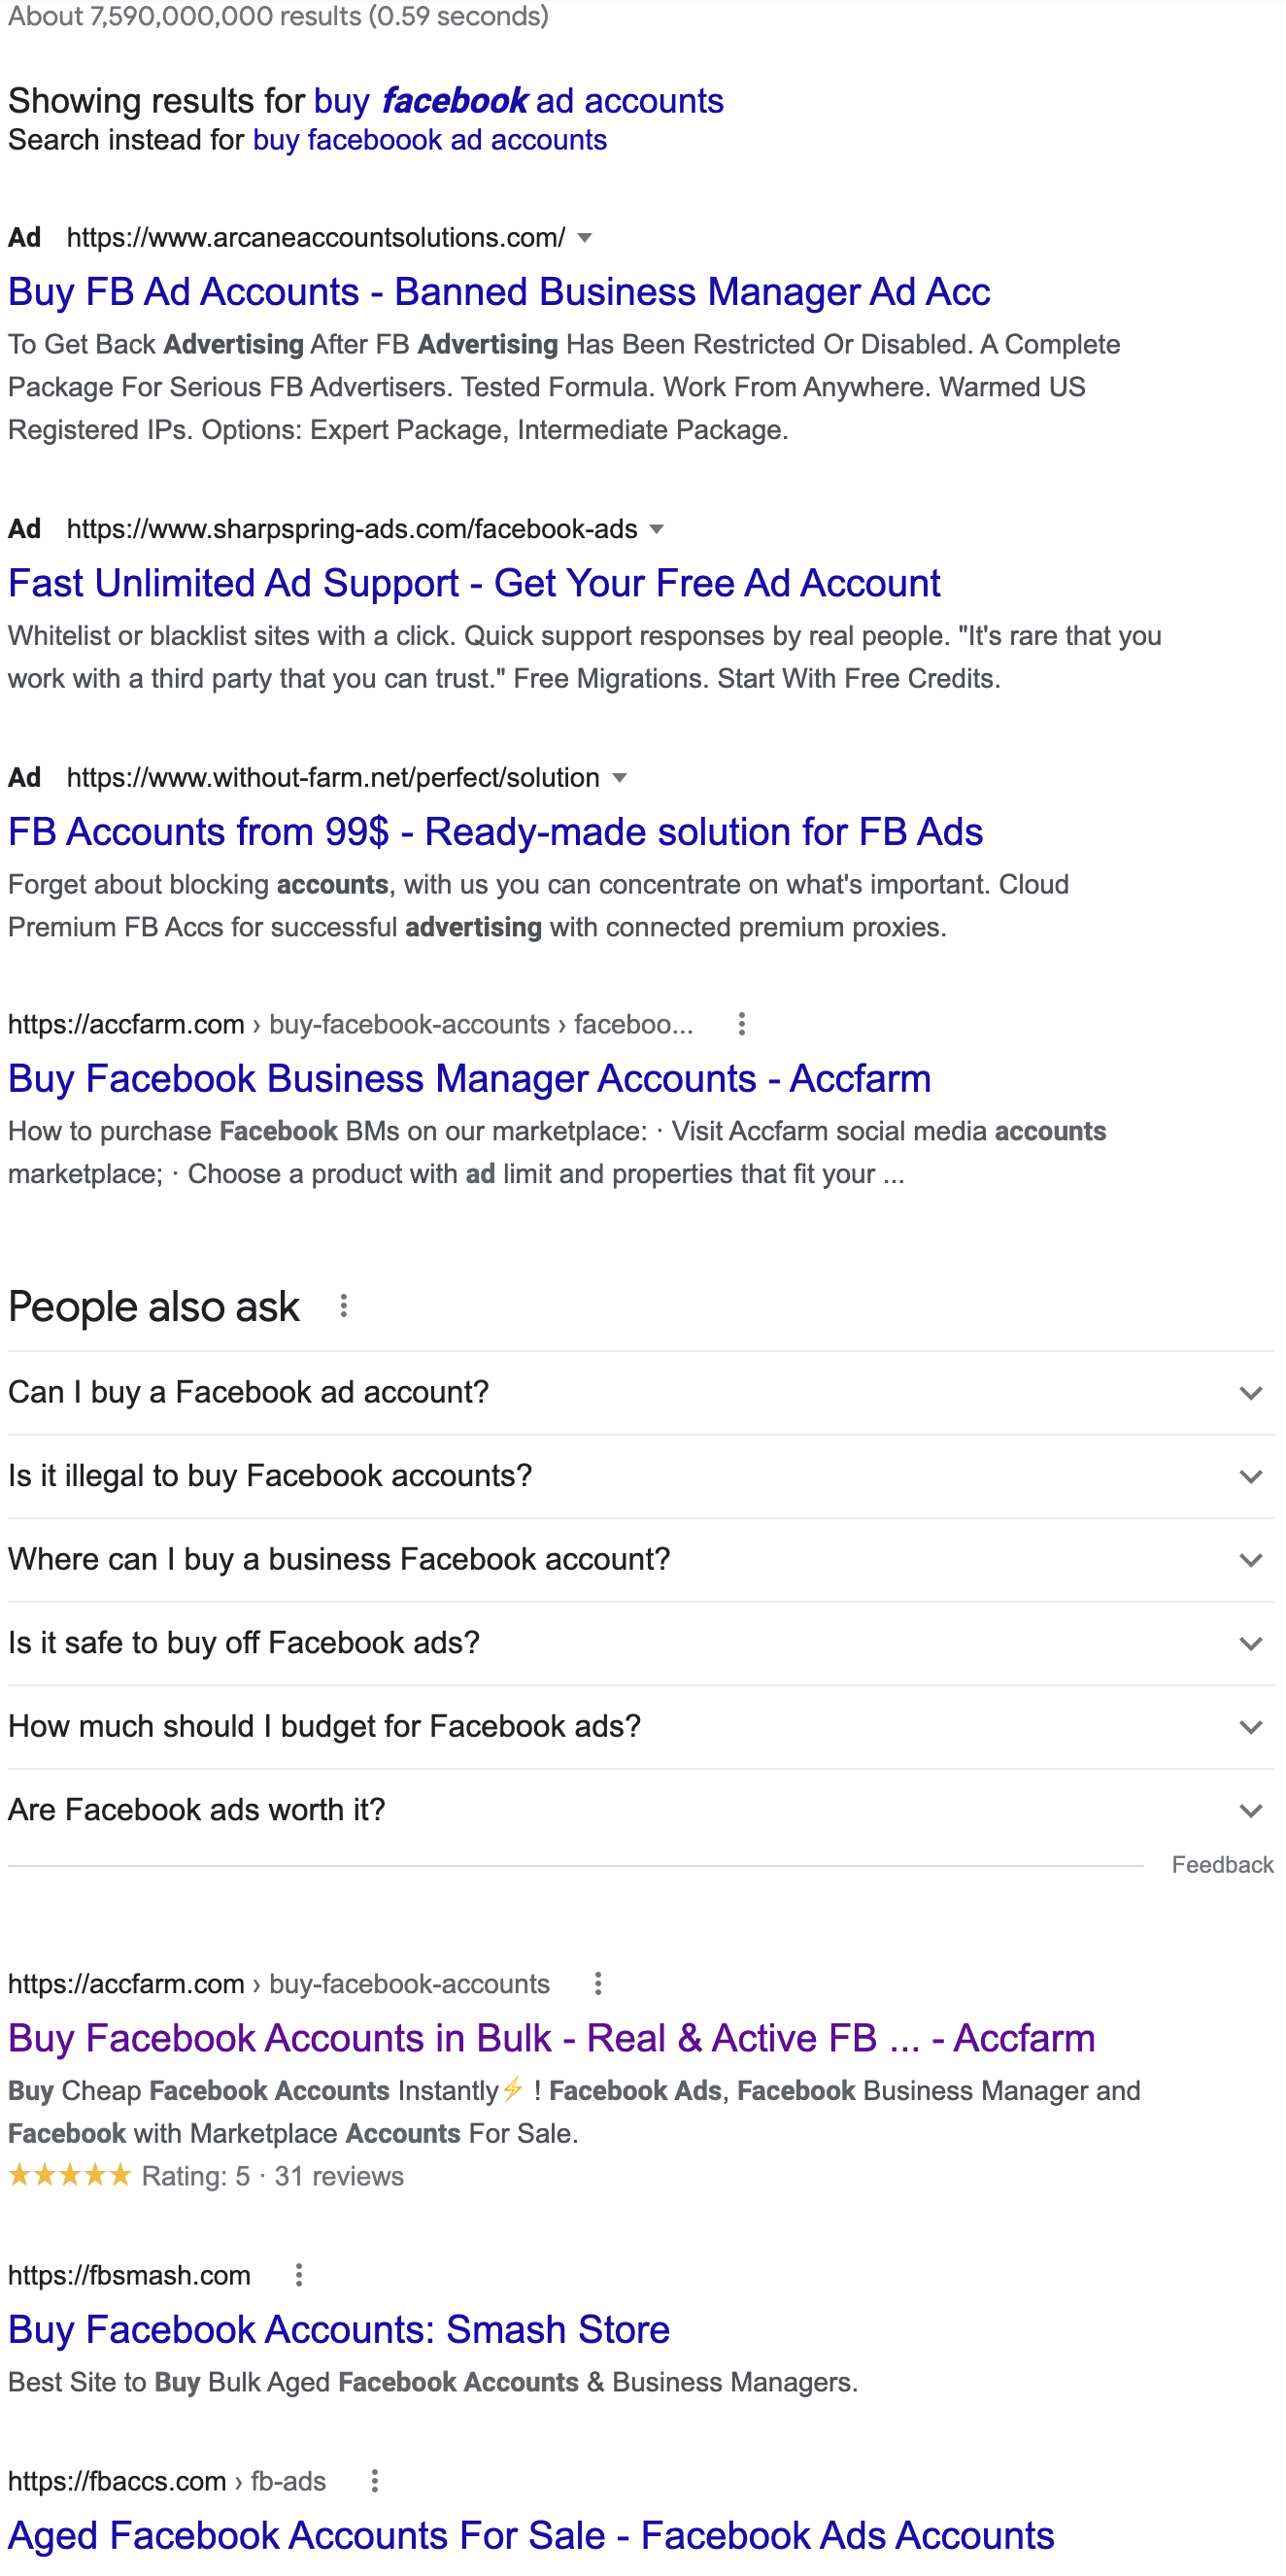 How to Login to Your Facebook Business Profile from Anywhere